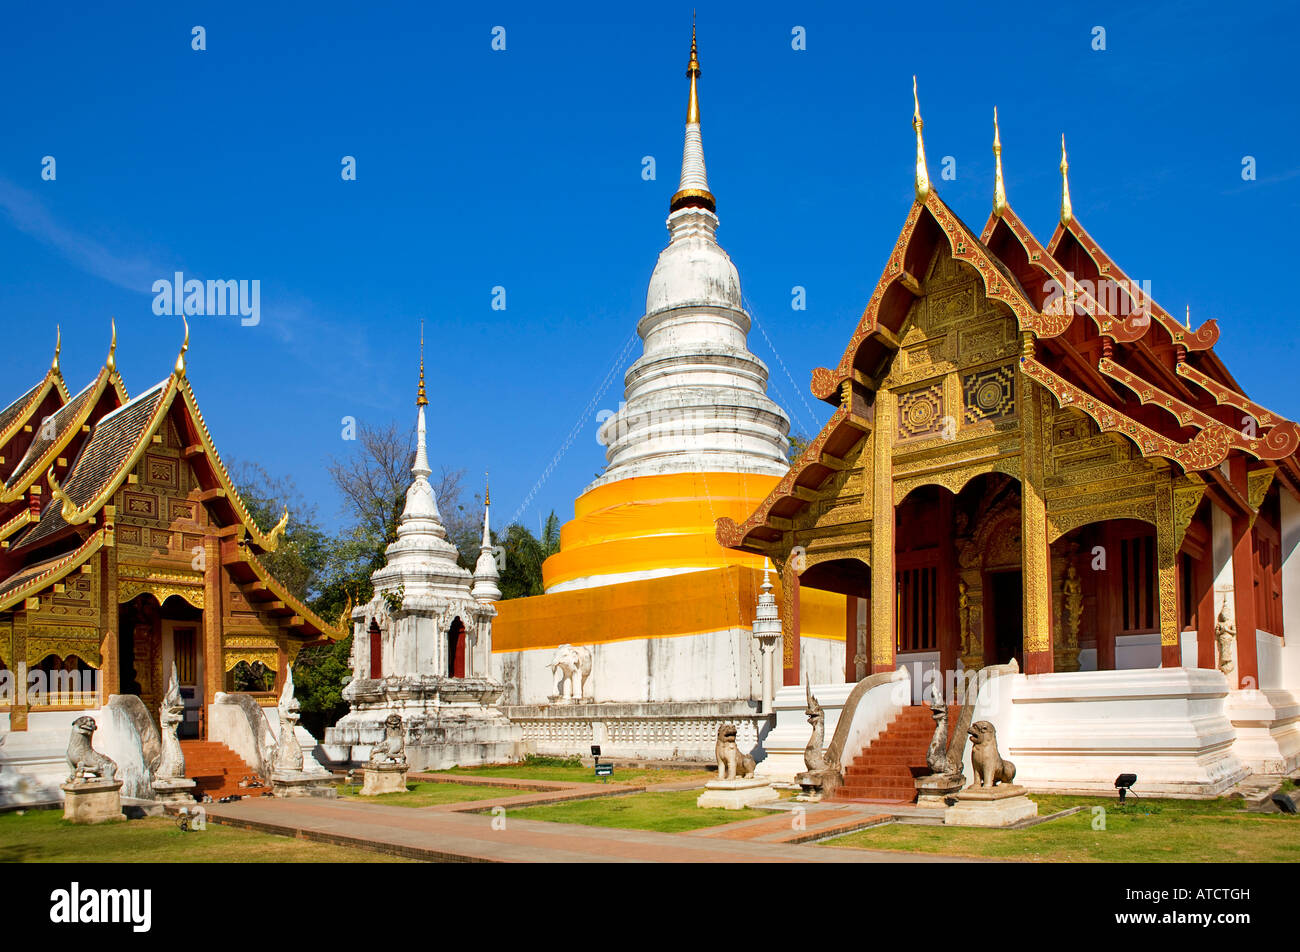 Wat phra sing temple in chiang mai Stock Photo